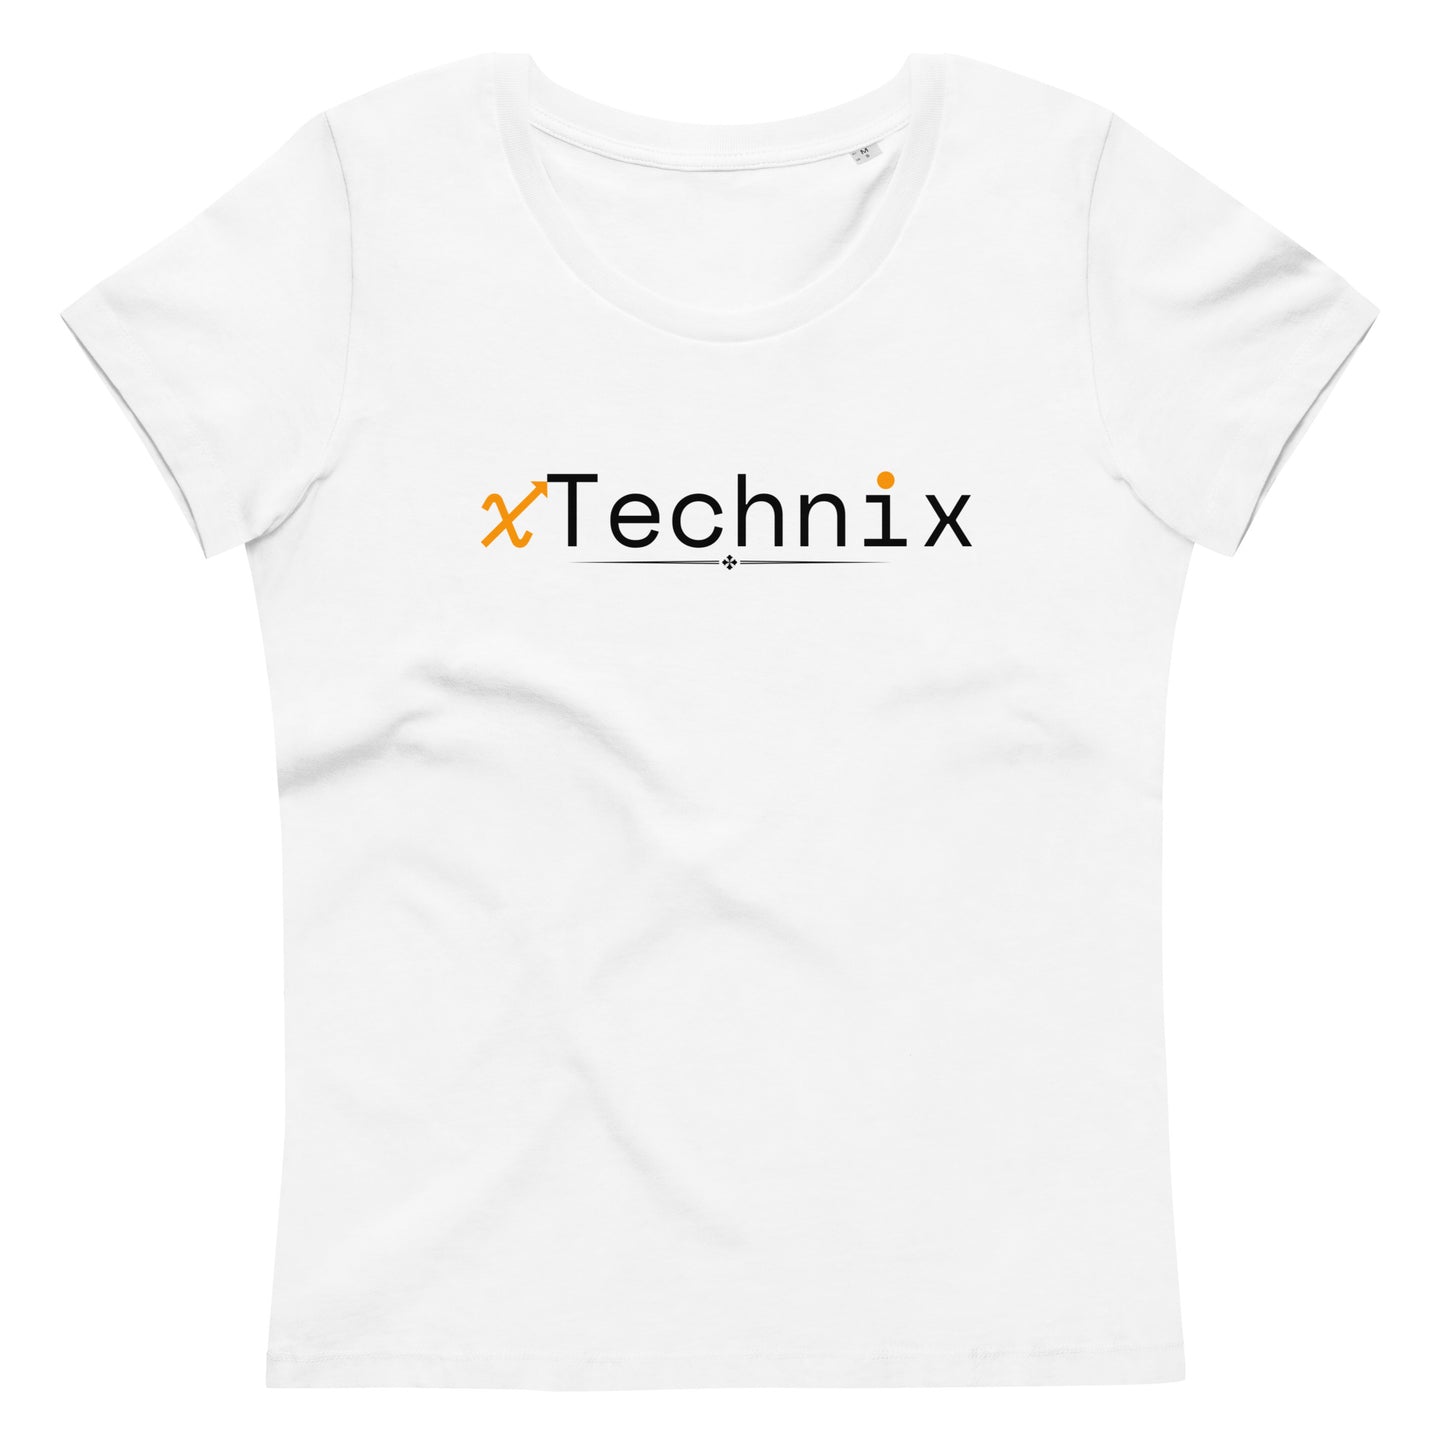 xTechnix Women's fitted eco tee